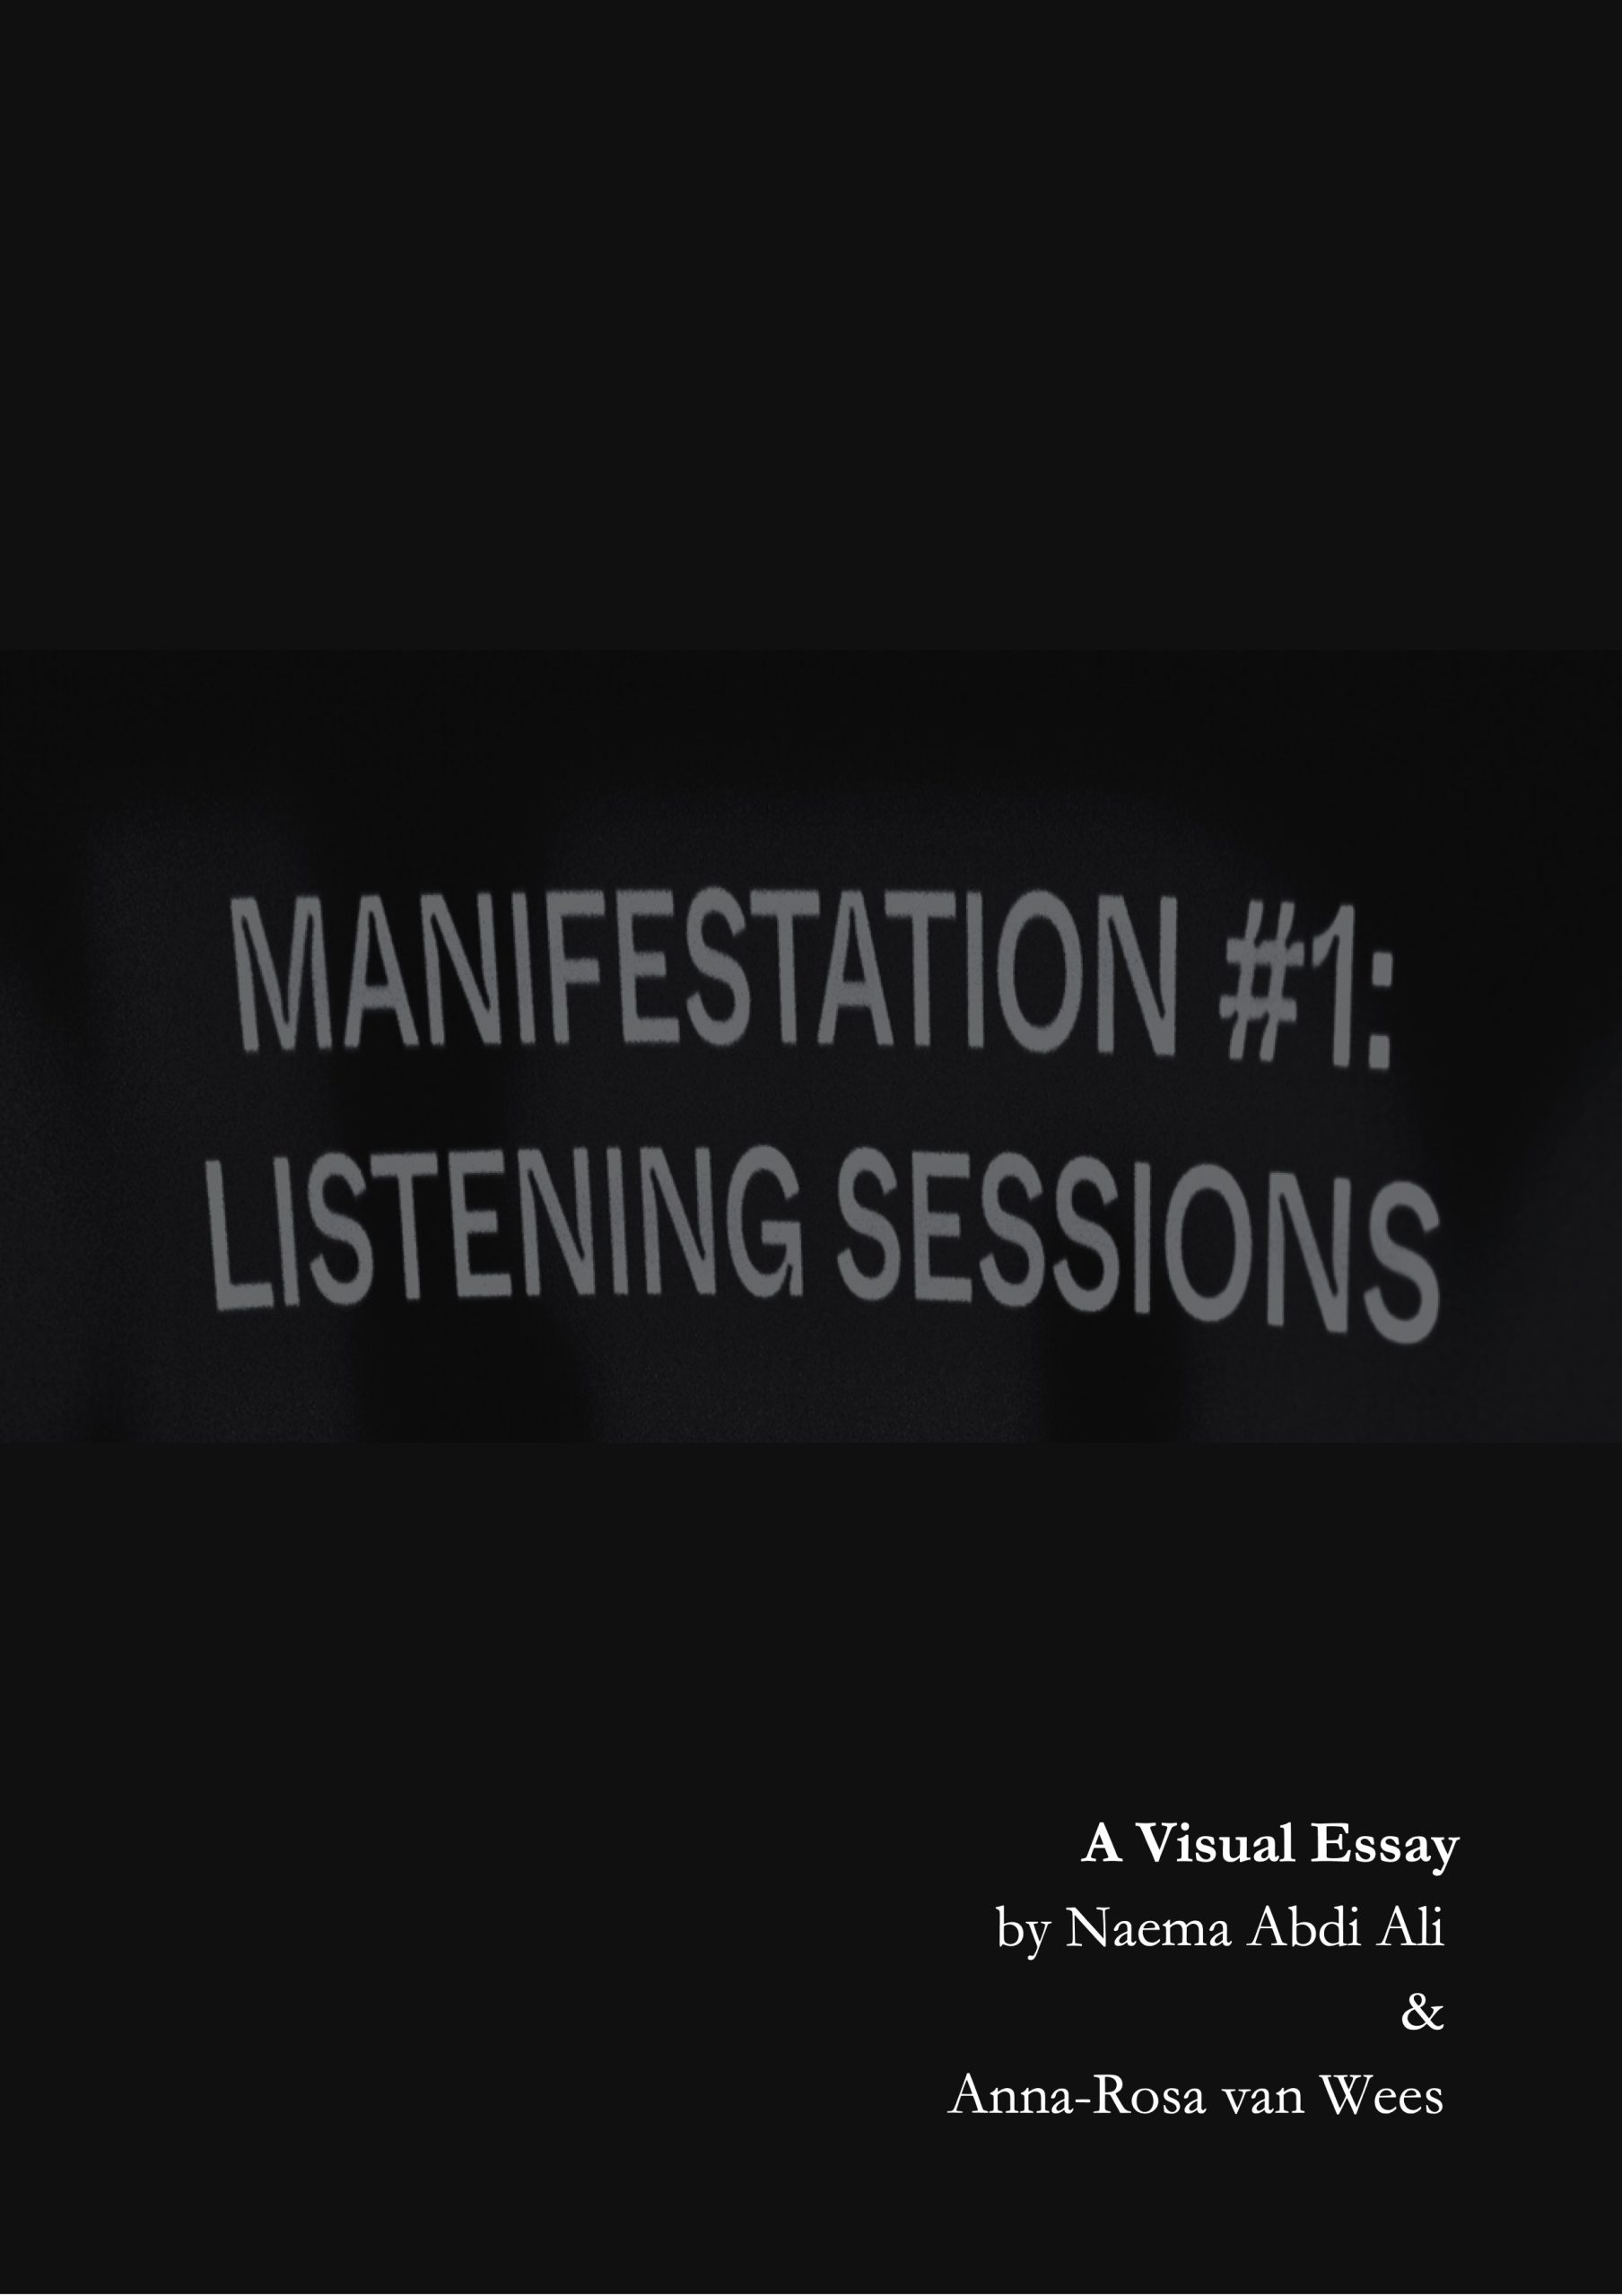 From listening to reflecting: thoughts on the Manifestation #1 Listening Sessions